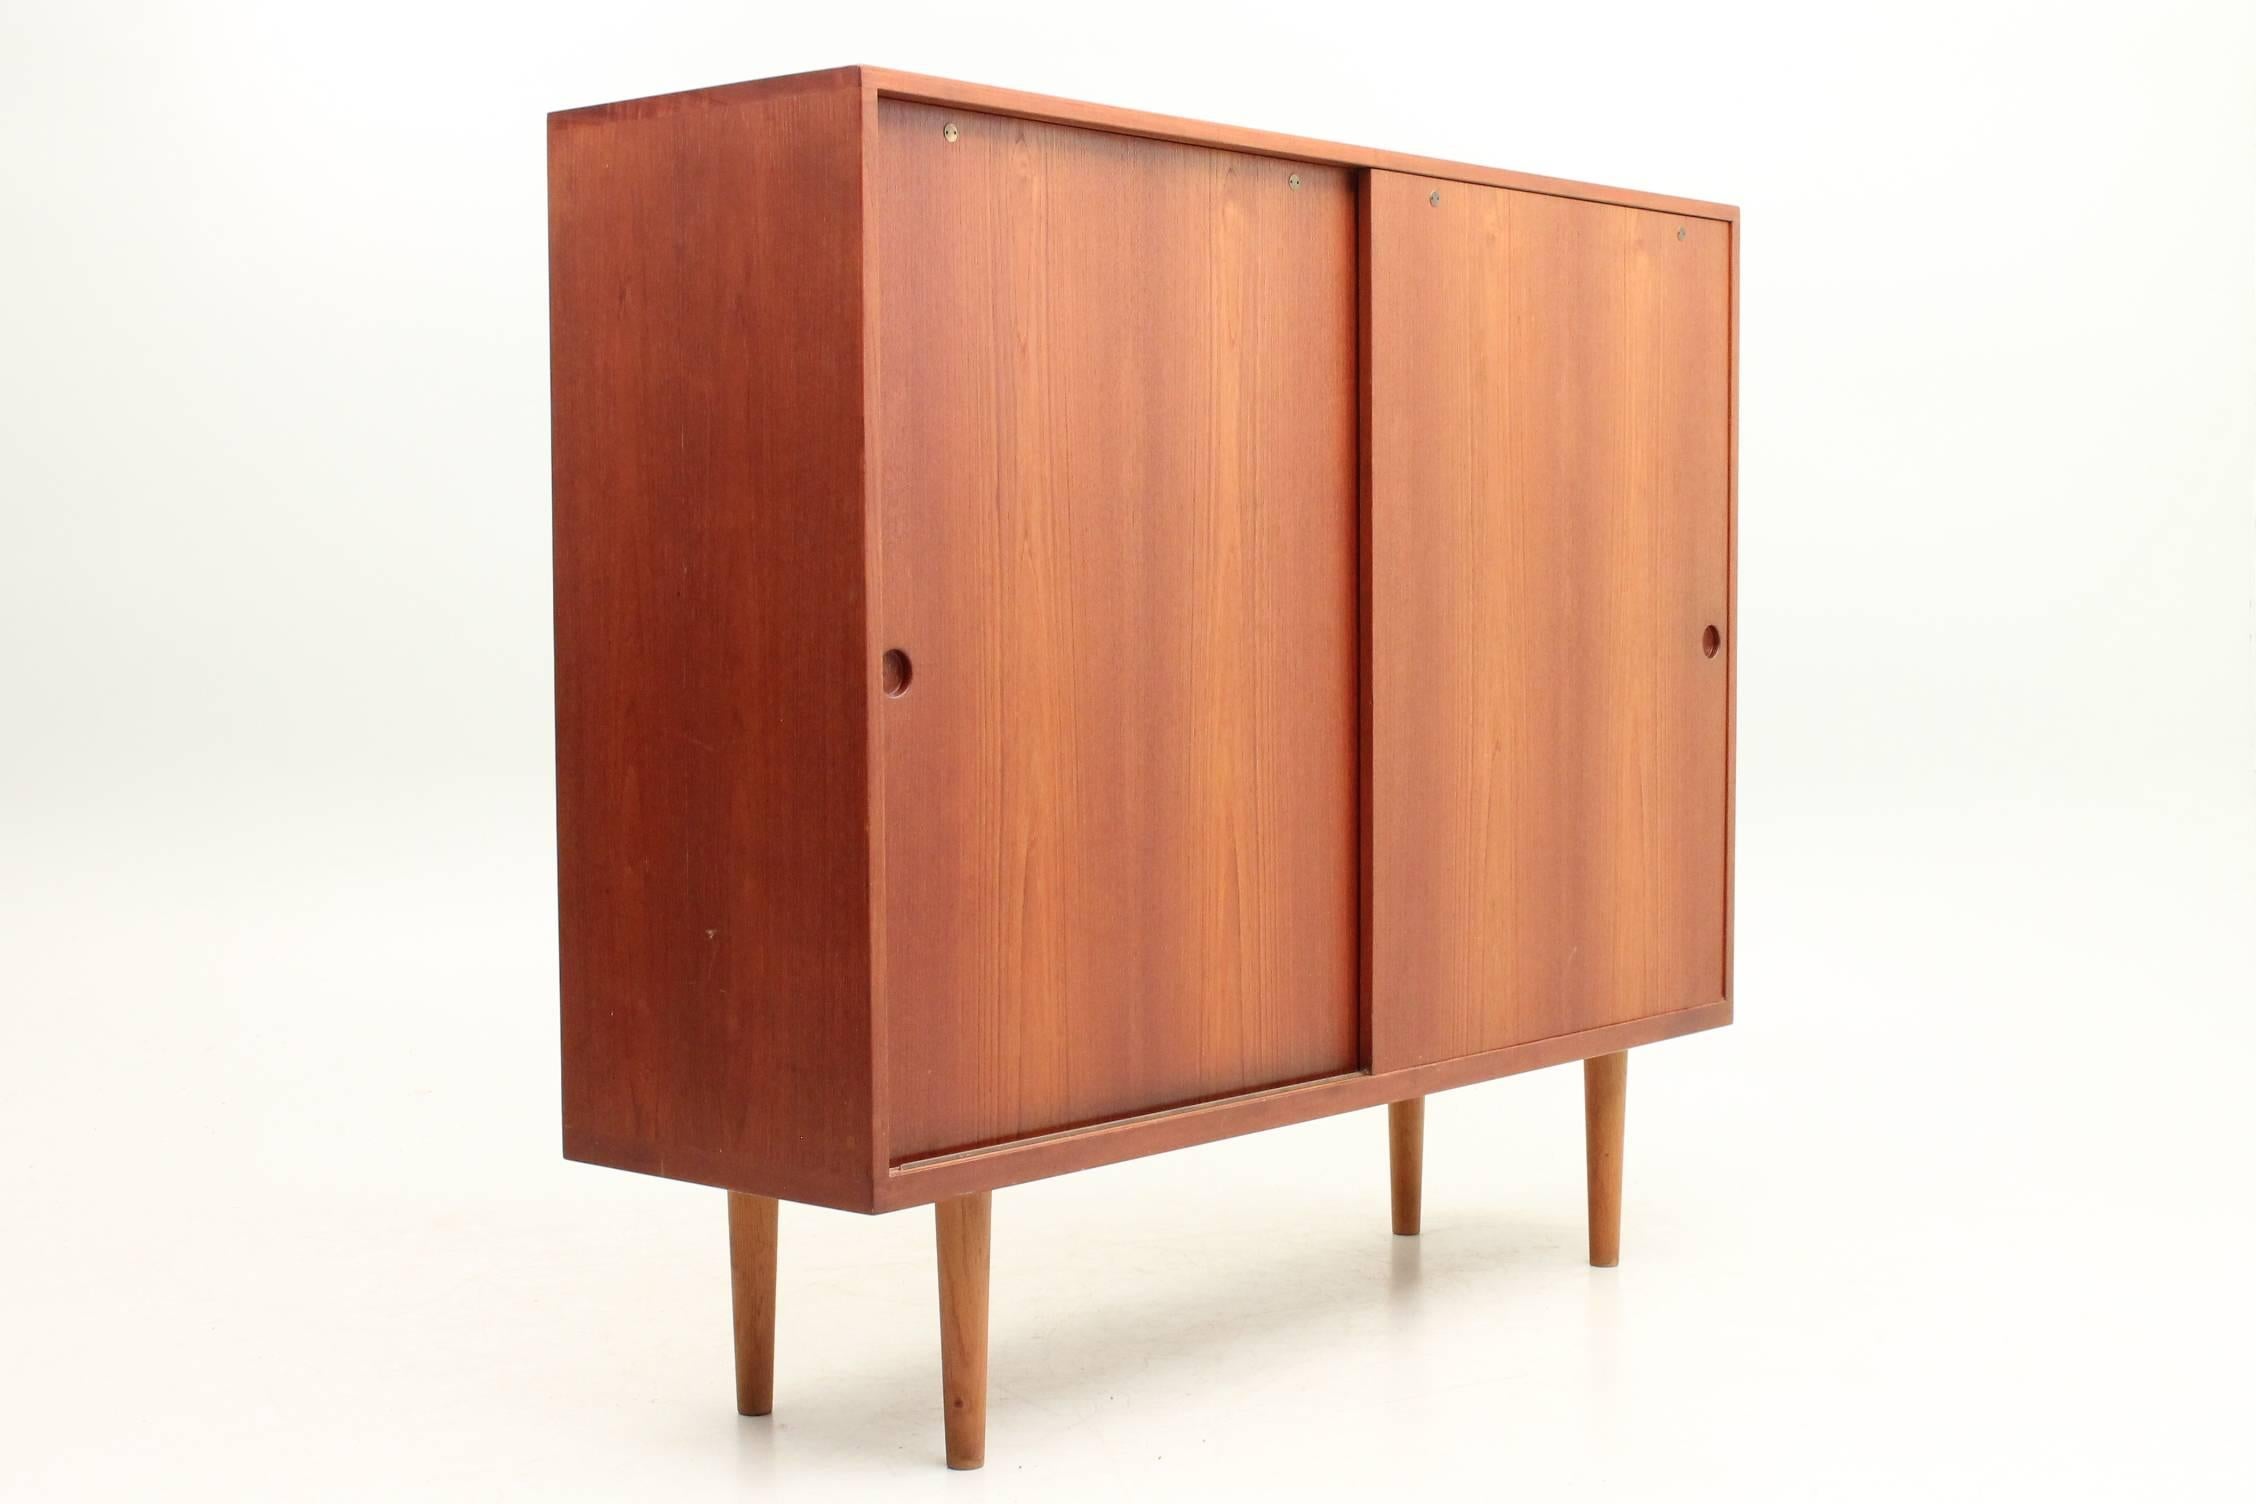 Teak RY26 cabinet designed by Hans J Wegner for Ry Møbler, circa 1959. This cabinet or highboard is a rare find and is in excellent vintage condition. This piece features fully adjustable shelves and two slim drawers. The sliding doors pull from a